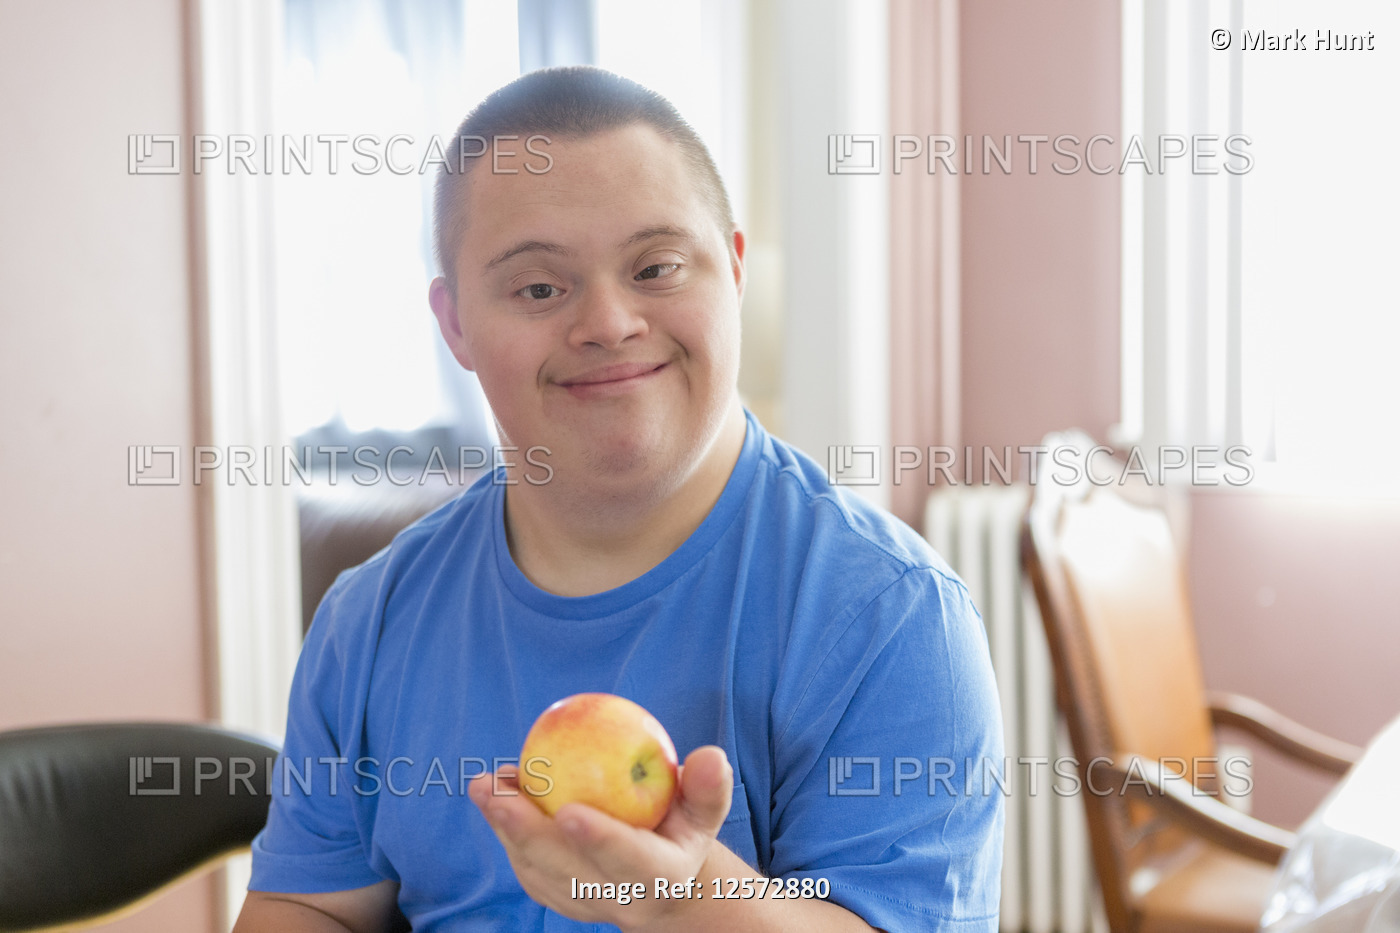 Teen with Down Syndrome holding fruit